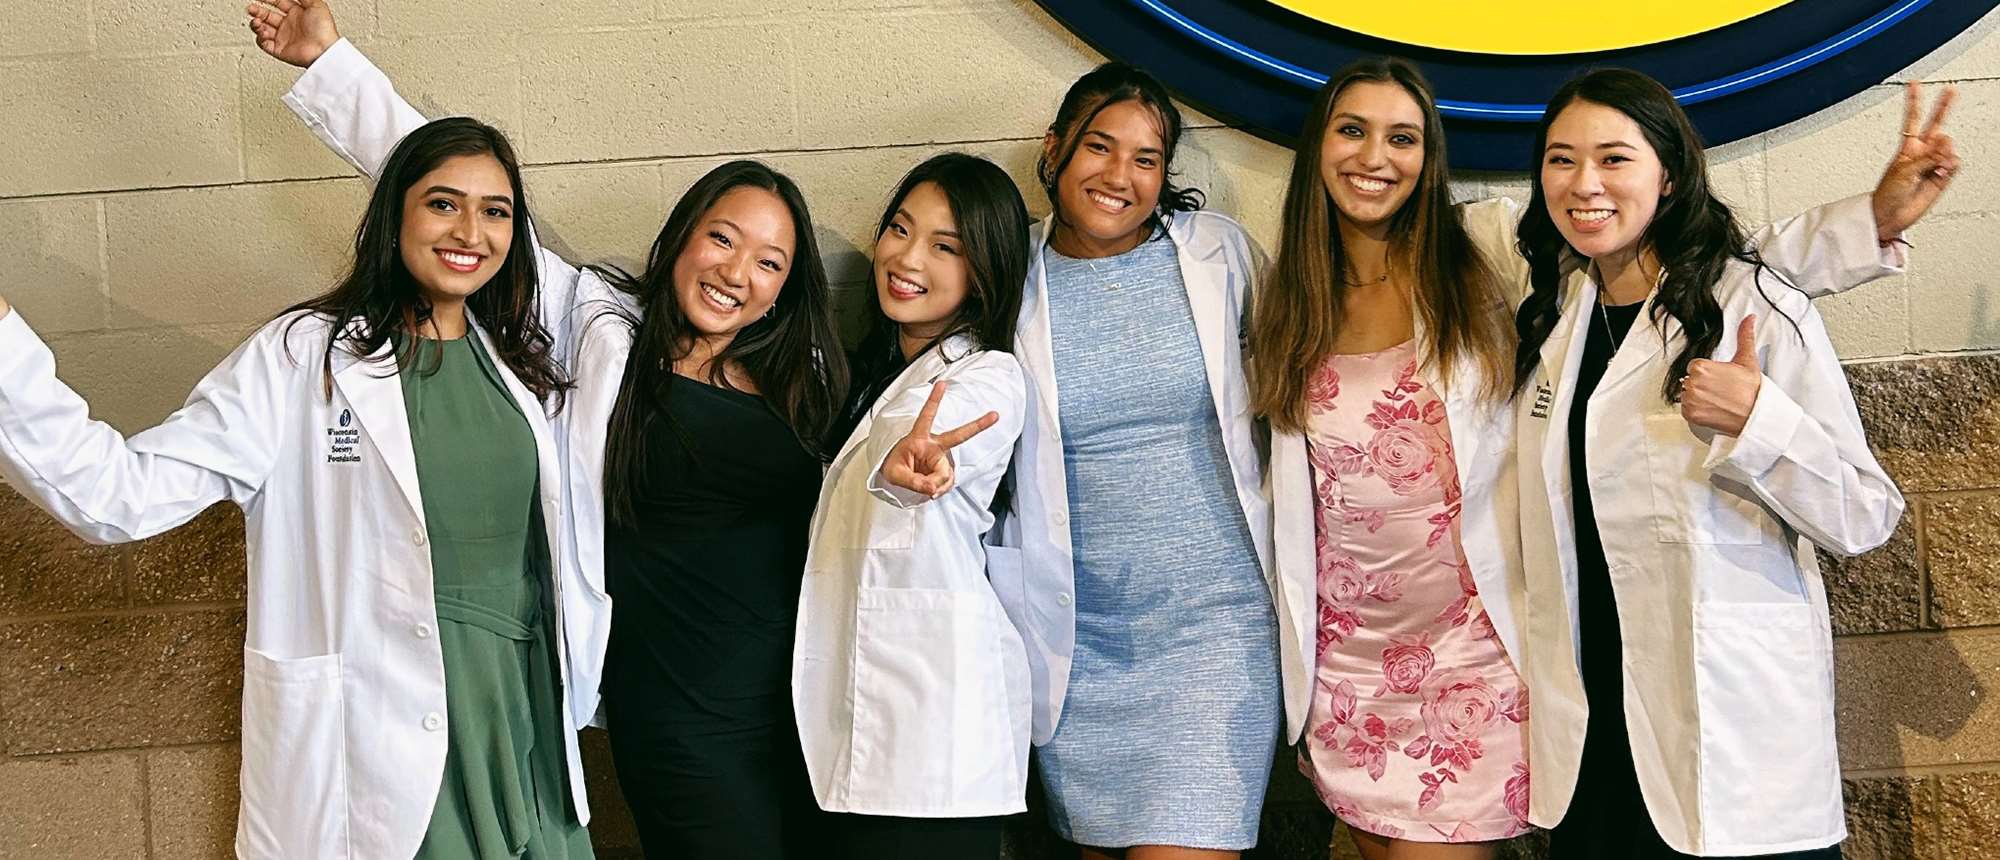 ӰԺ student pursues passion for providing culturally competent care for Asian Americans